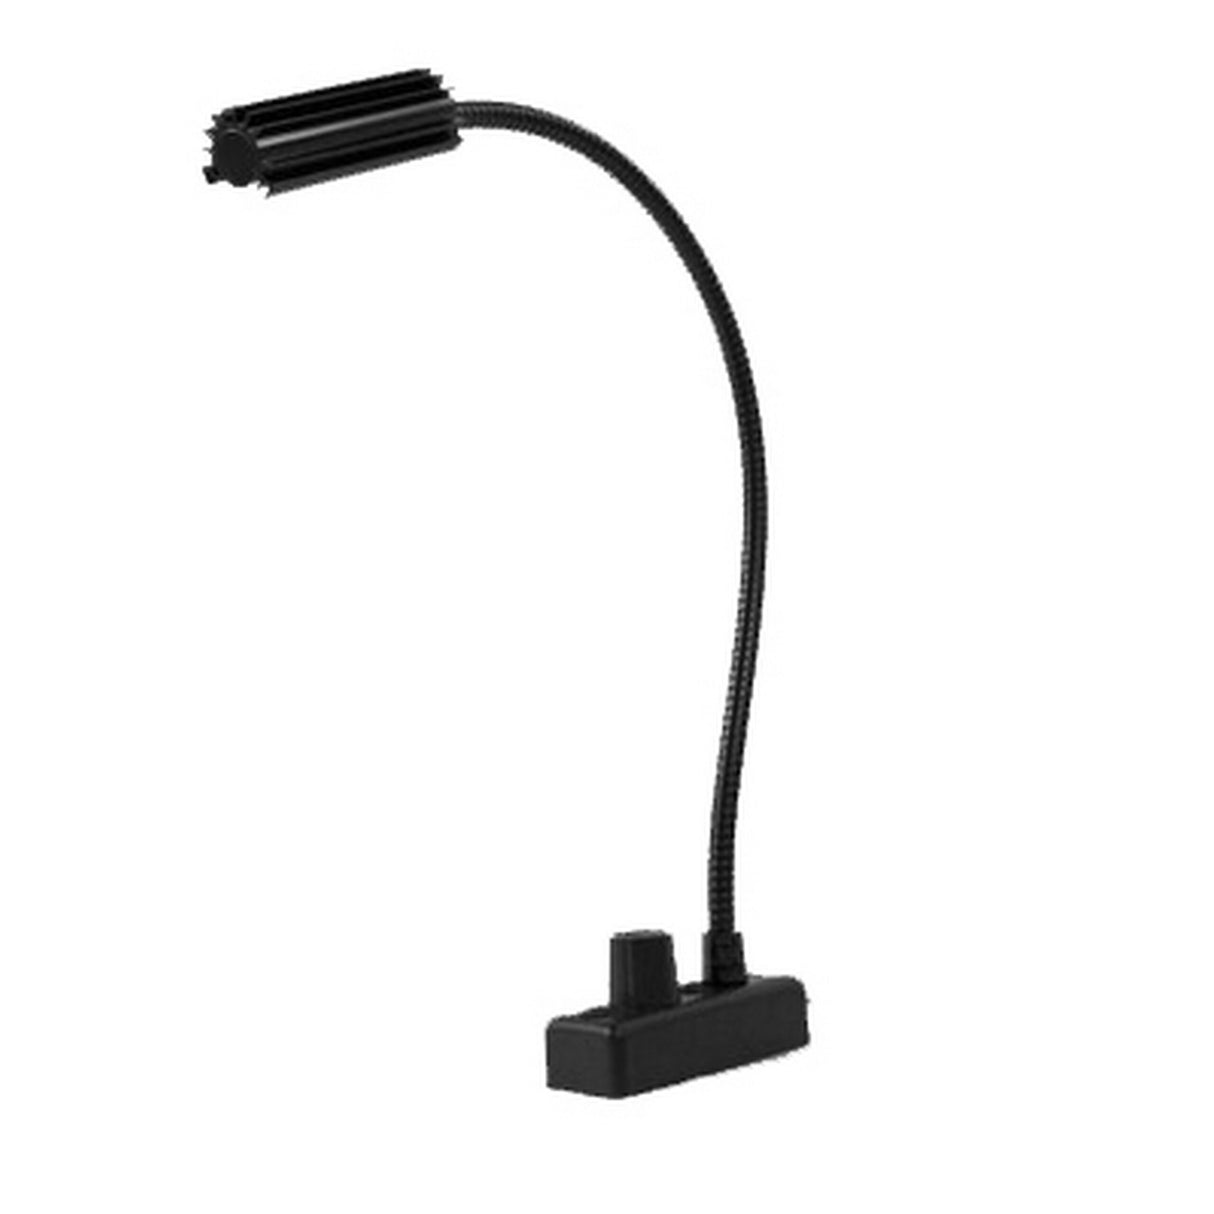 Littlite L-3/12A 12 Inch High Intensity Gooseneck Lampset with No Power Supply